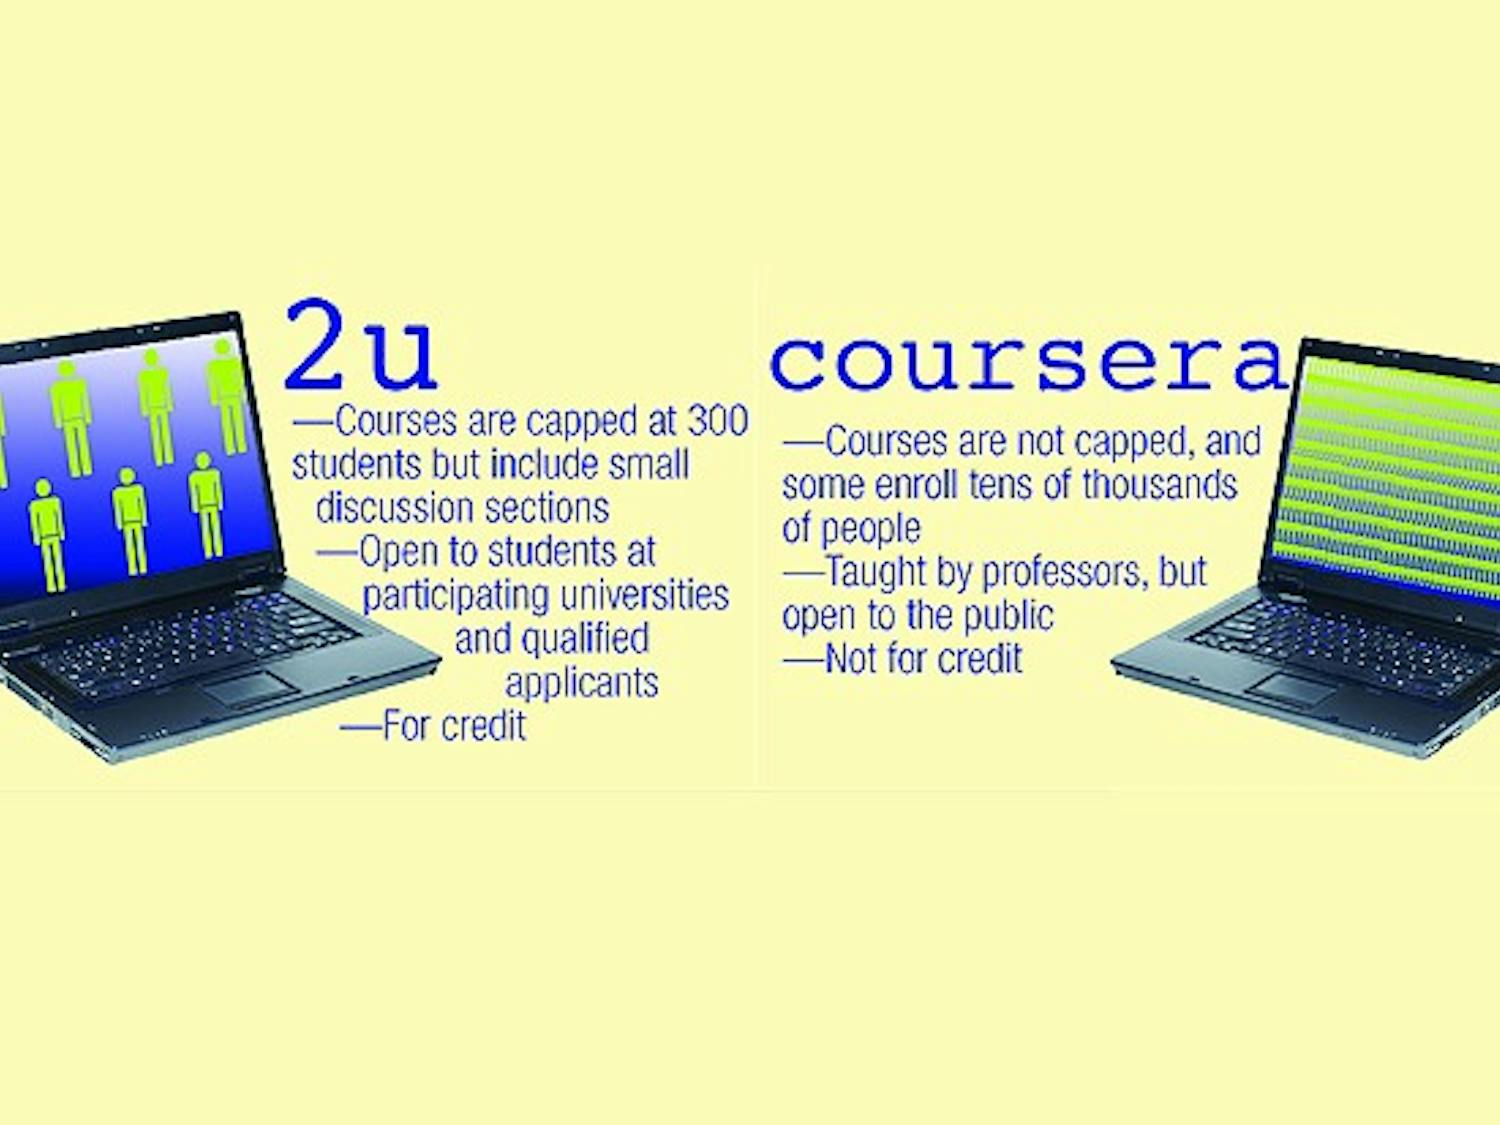 Duke is now involved in two online educational initiatives. Through the Coursera platform, professors are able to offer large-scale courses to the public, whereas 2u courses are intended for Duke students.